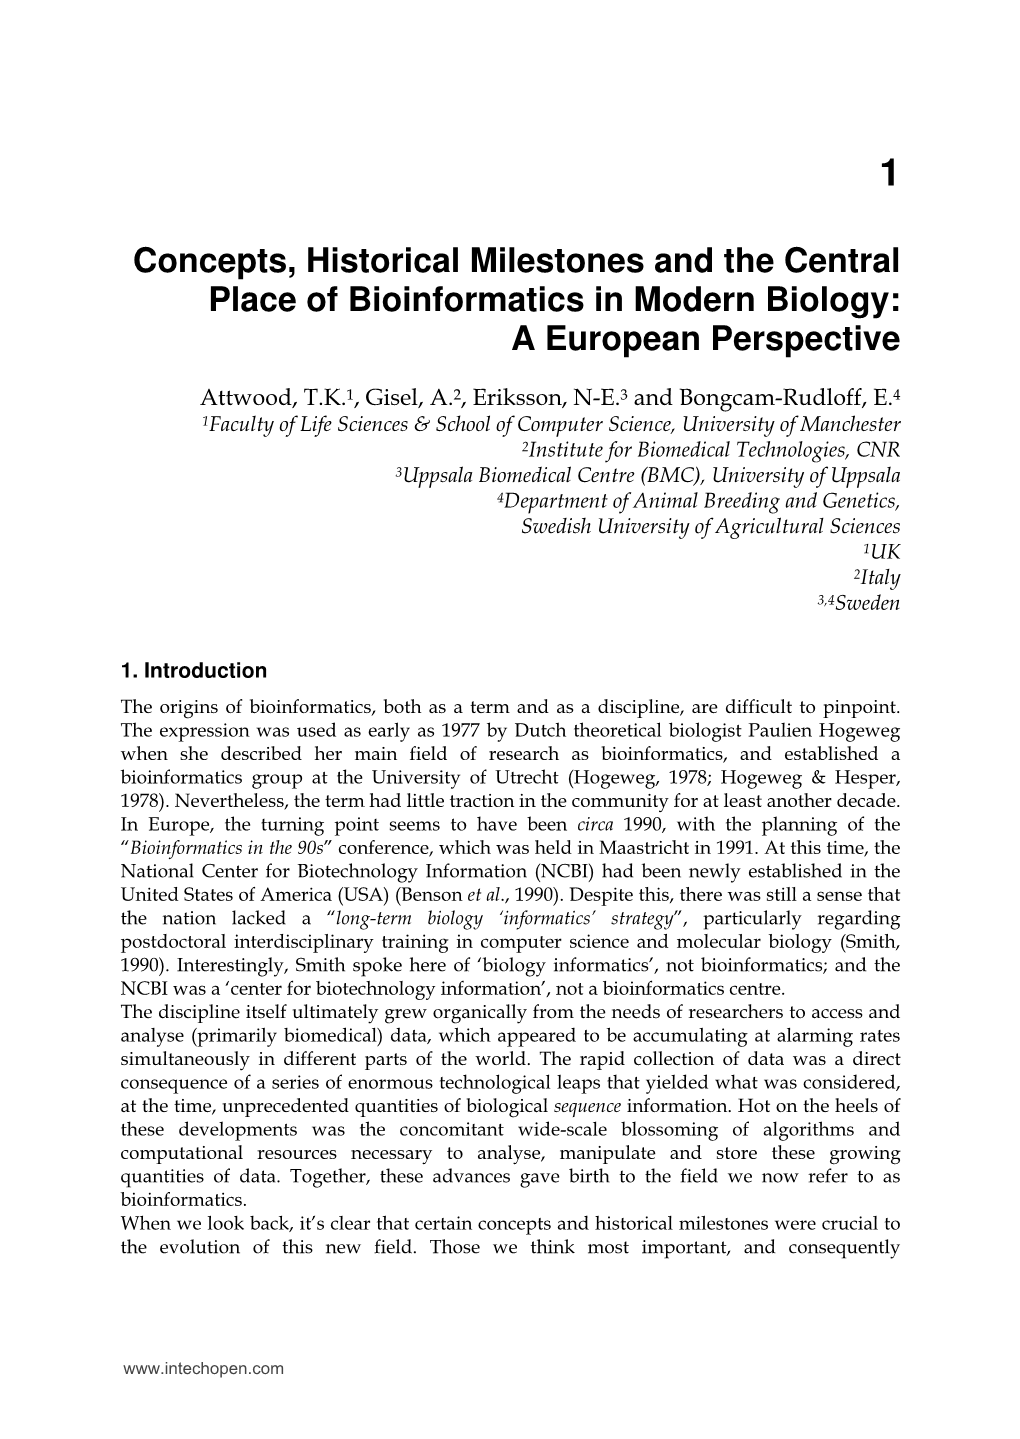 Concepts, Historical Milestones and the Central Place of Bioinformatics in Modern Biology: a European Perspective